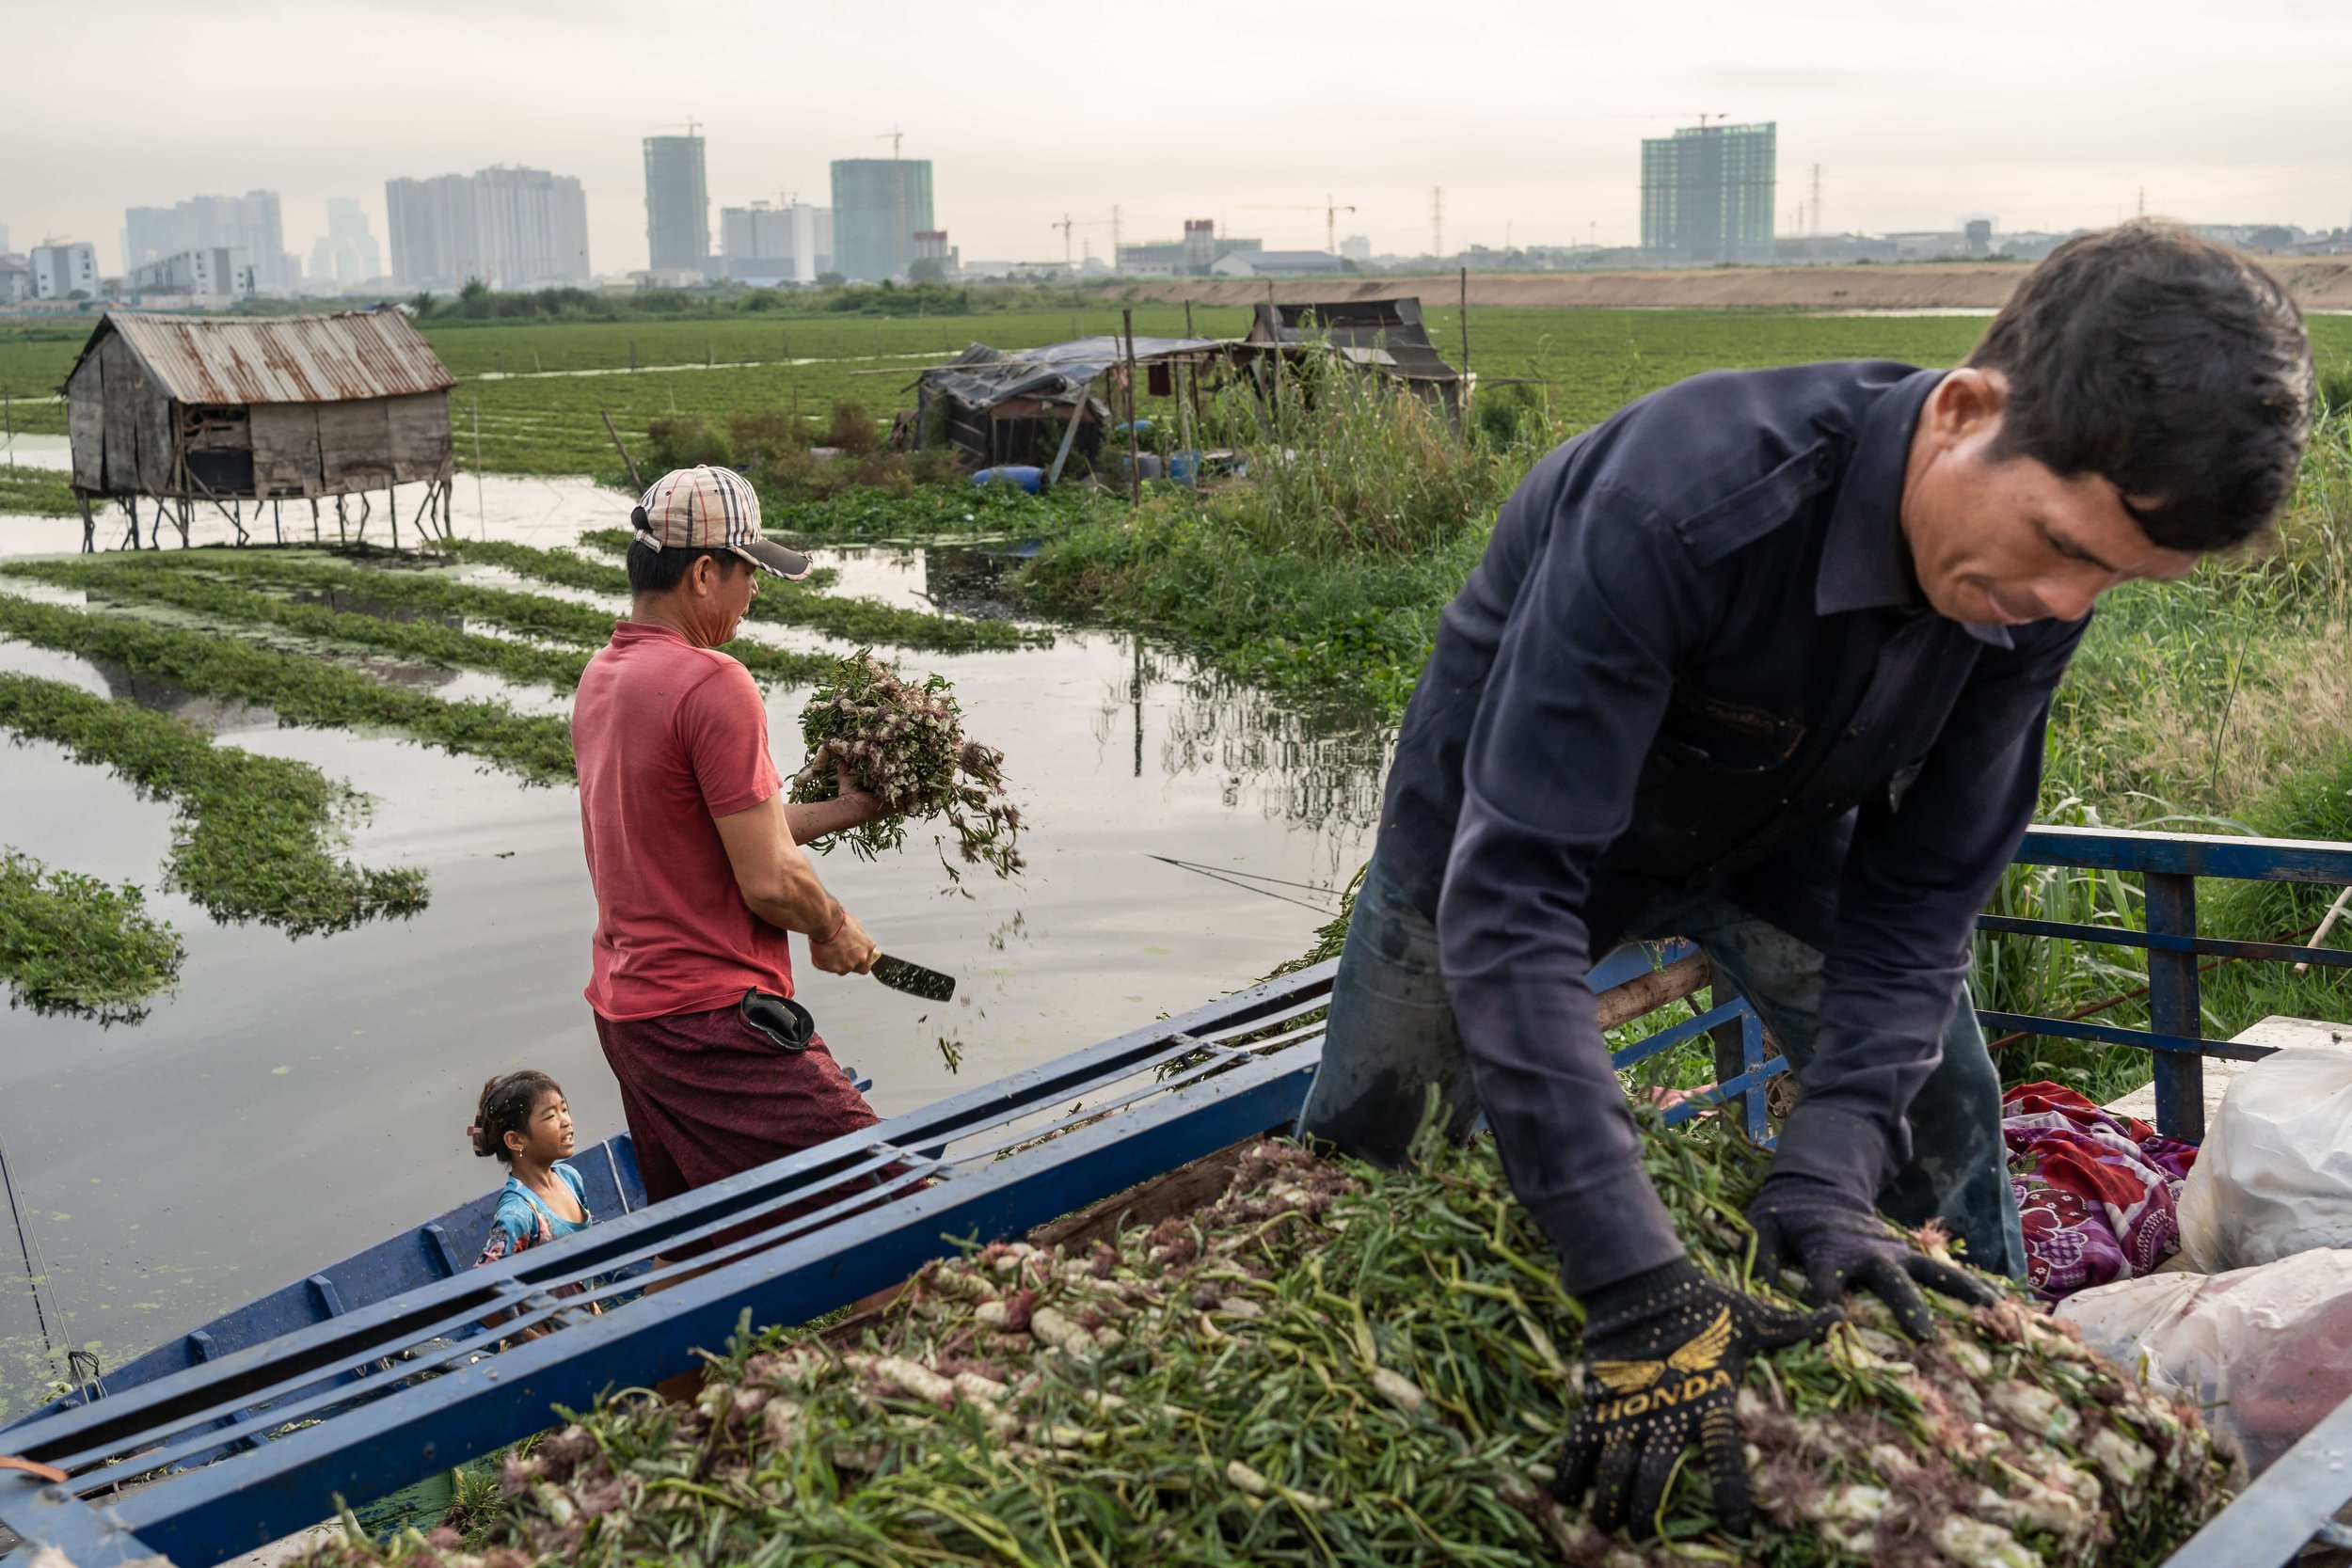  Middlemen load their bikes with water mimosa, a crop that commonly grows on the wetlands, before selling it at one of the city’s bustling markets. Water mimosa, along with a number of other semi-aquatic plants, commonly grows in the wetlands, suppor